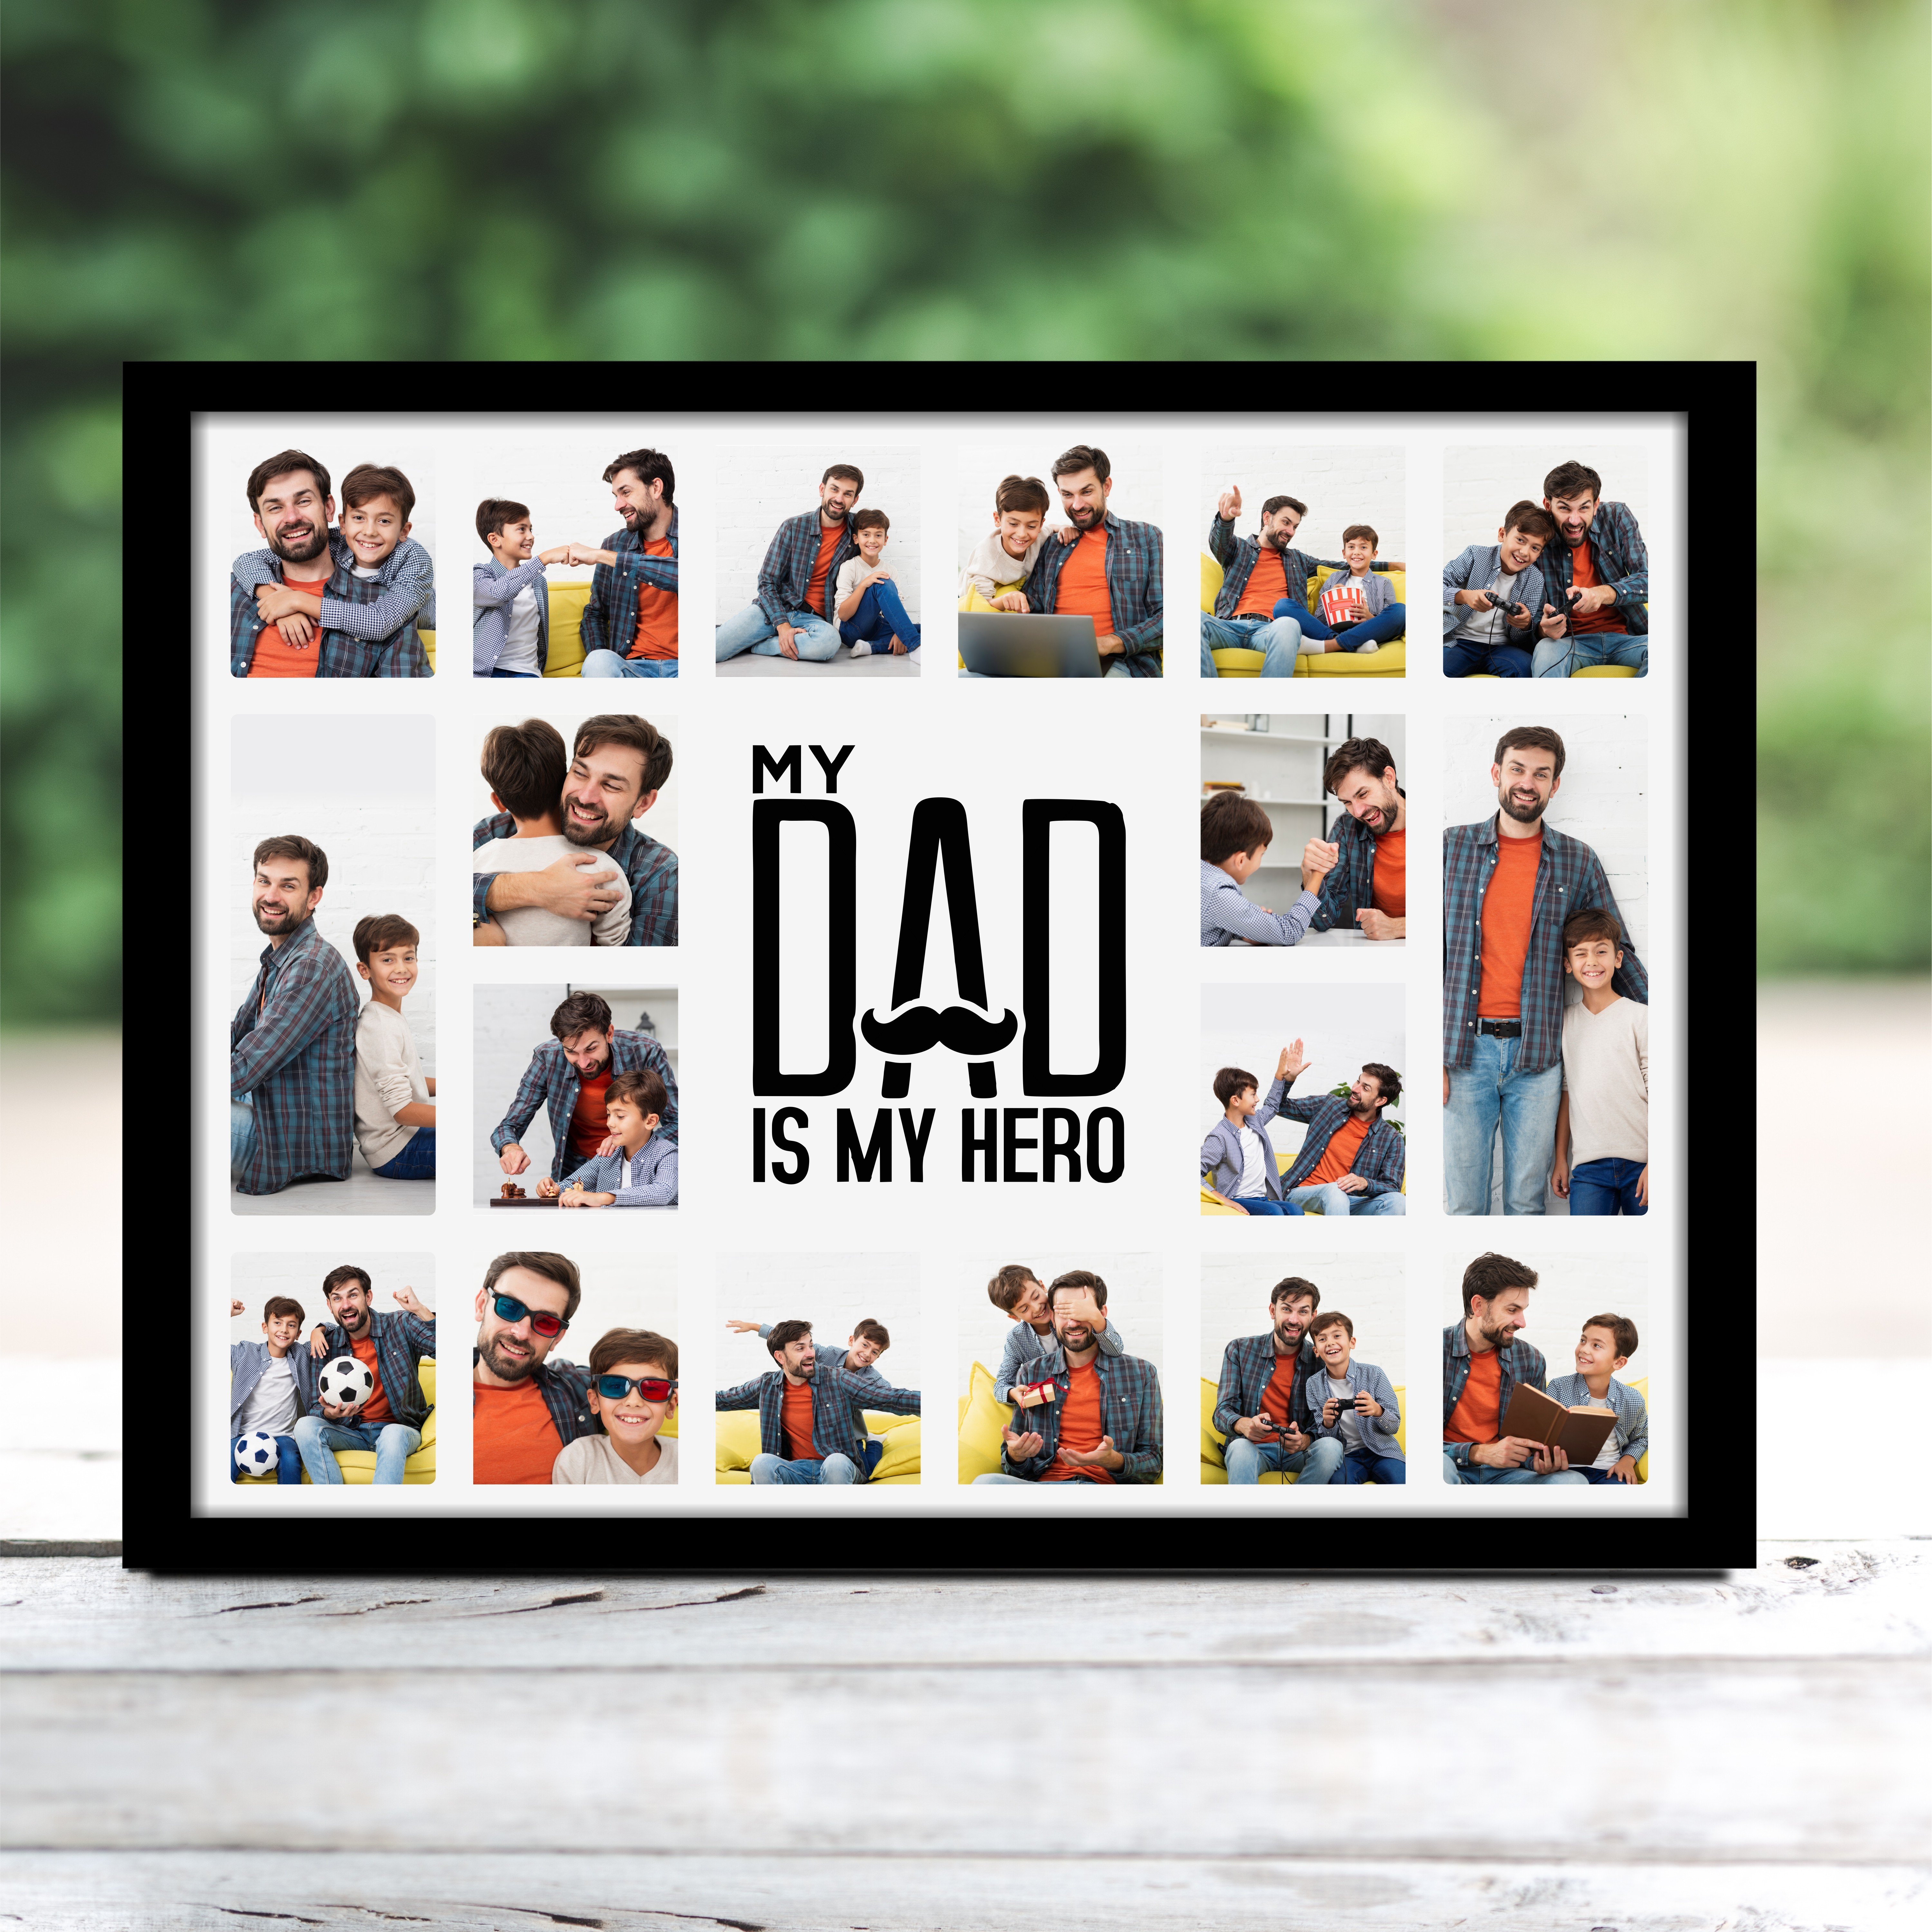 Memories Galore – Photo Frame For Dad